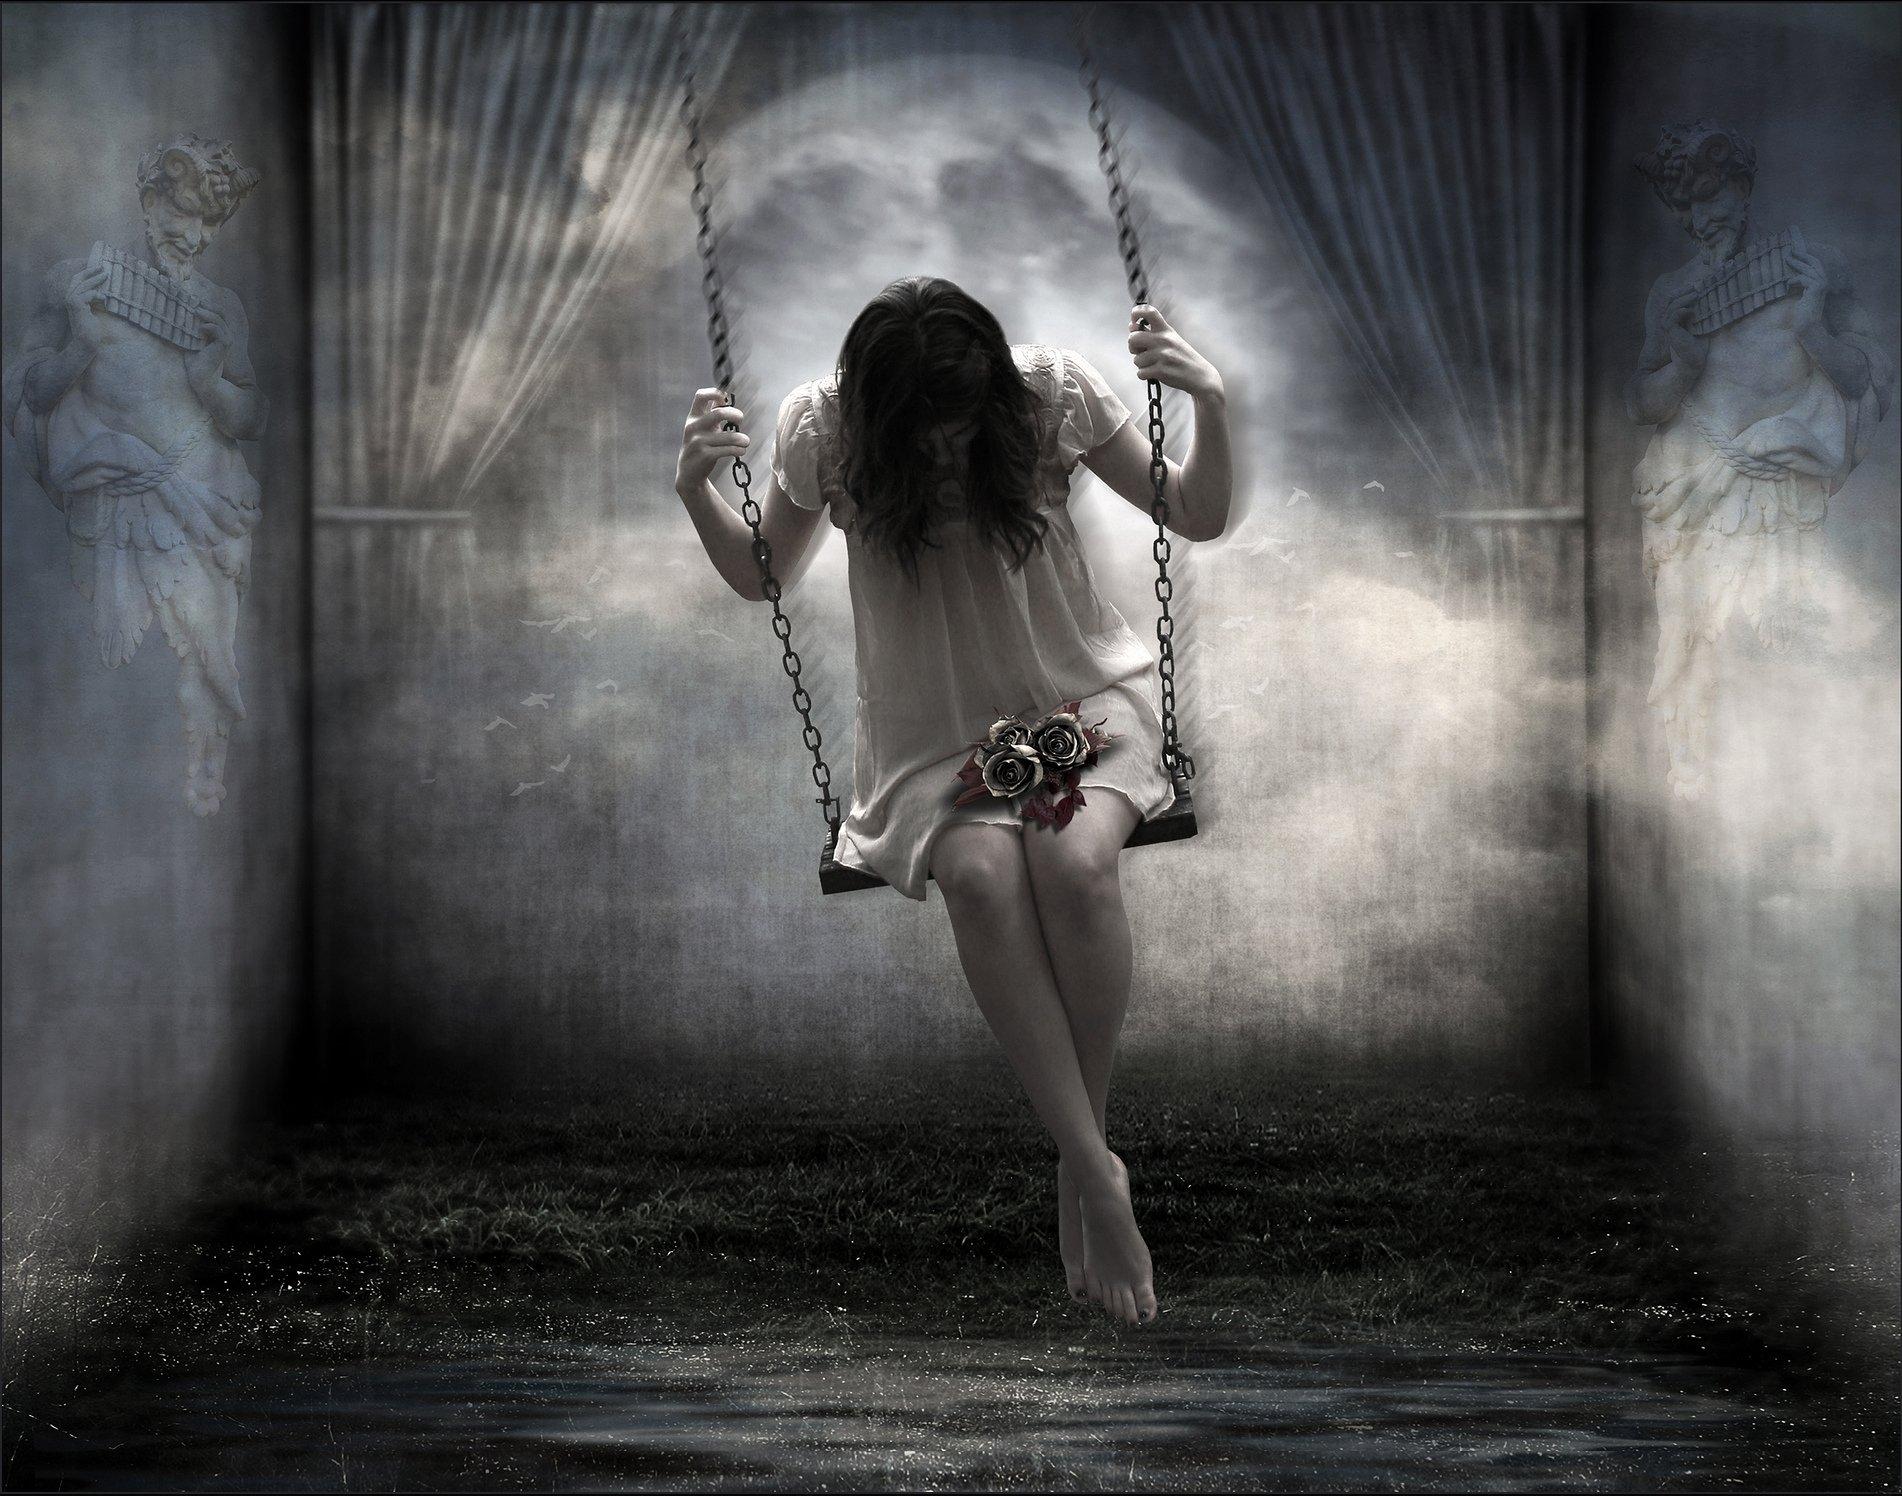 Girl on a Swing in Ghostly Room Wallpaper